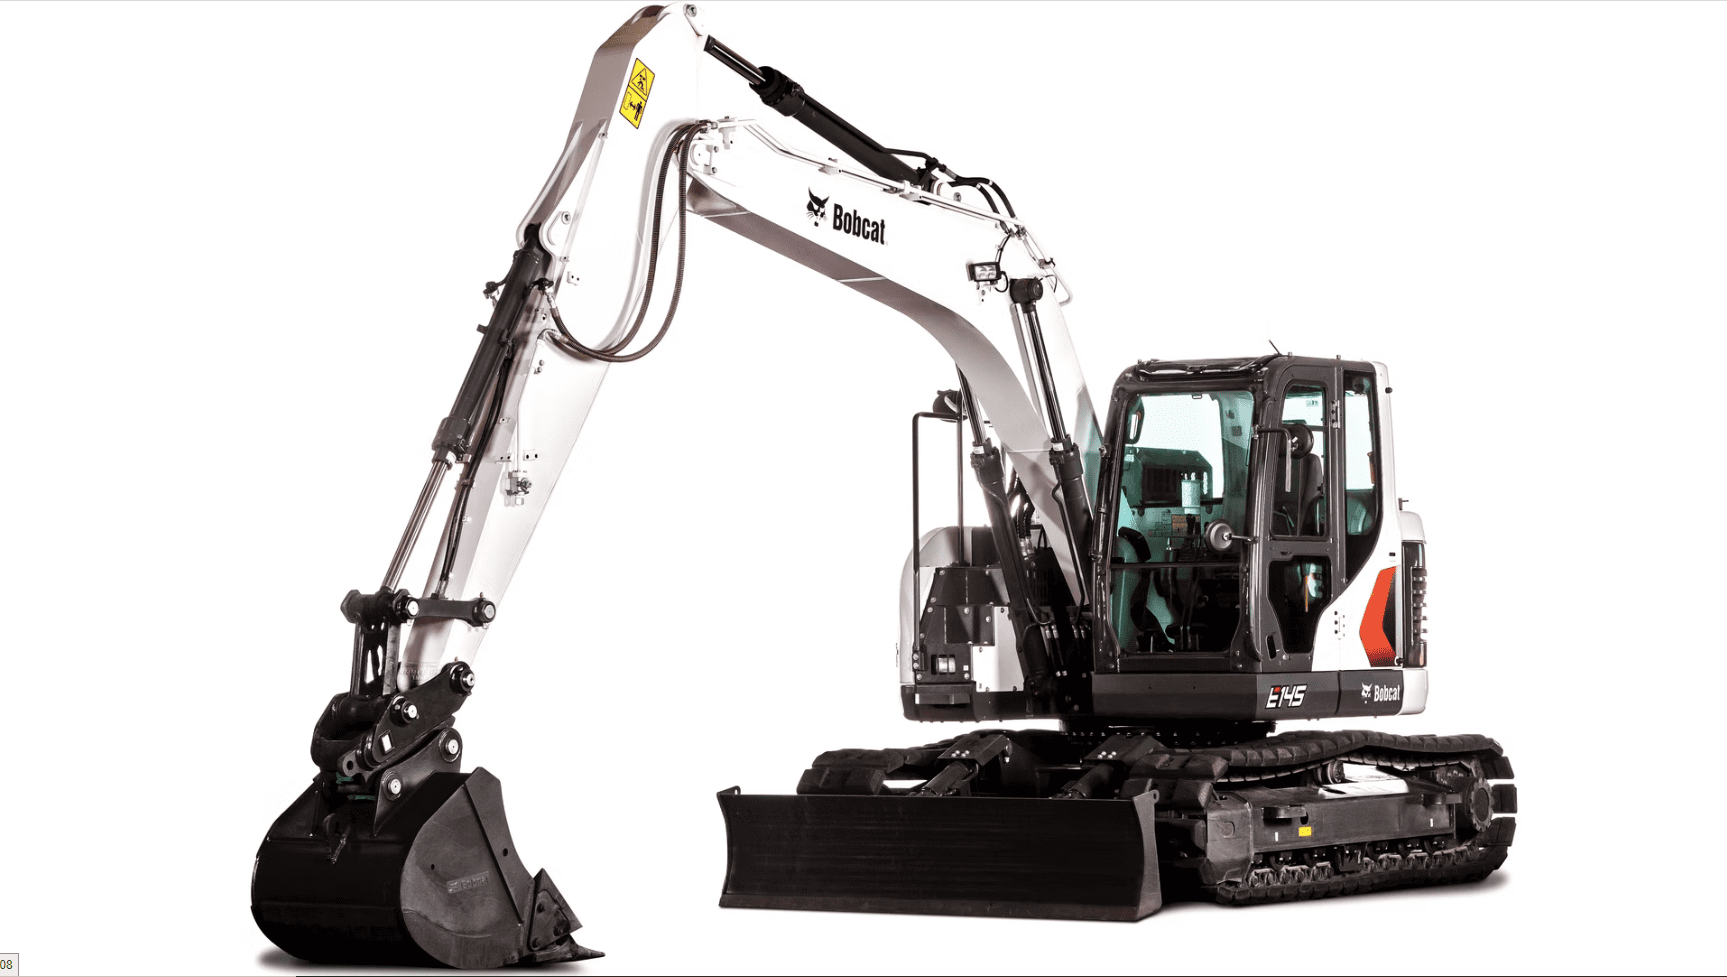 Browse Specs and more for the Bobcat E145 Large Excavator - Bobcat of the Rockies